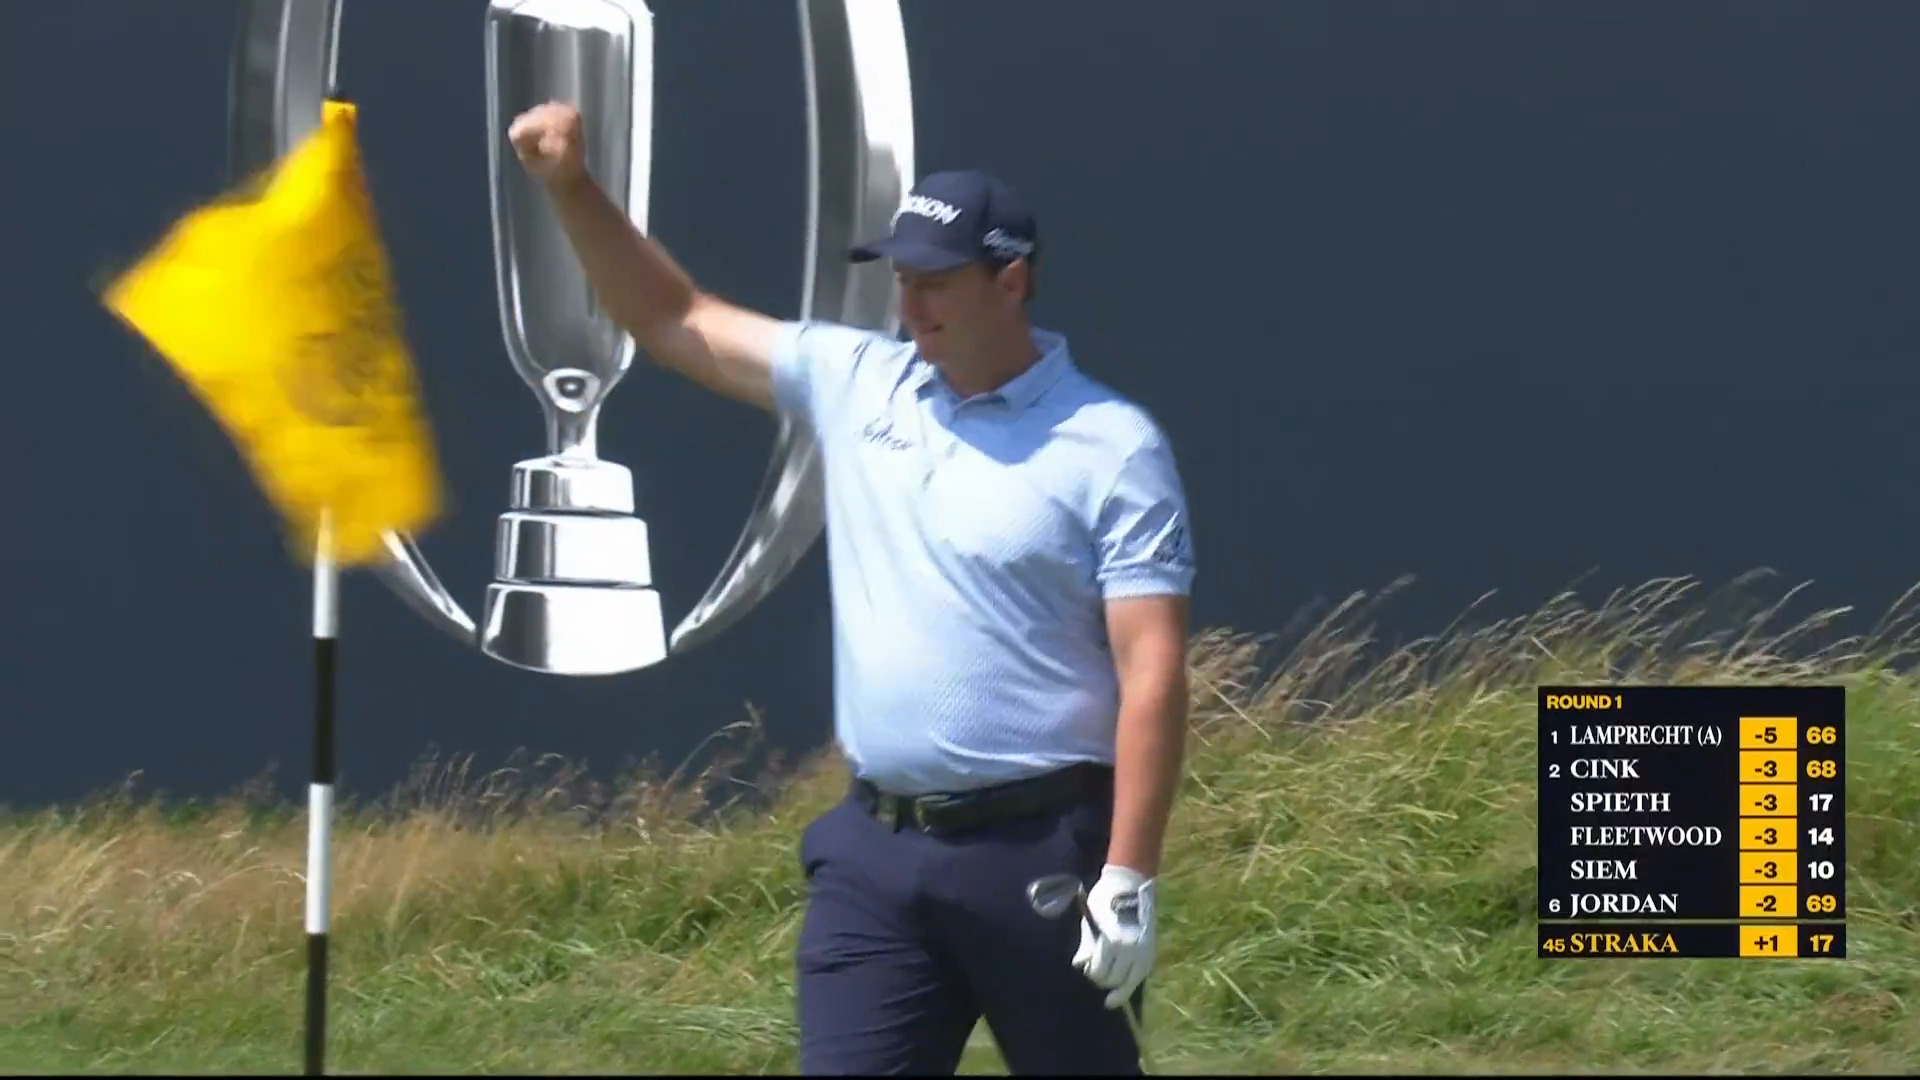 “Just attempting this shot is insanity”: Sepp Straka sends golf fans into  meltdown with an insane chip shot over bunker at Open Championship 2023